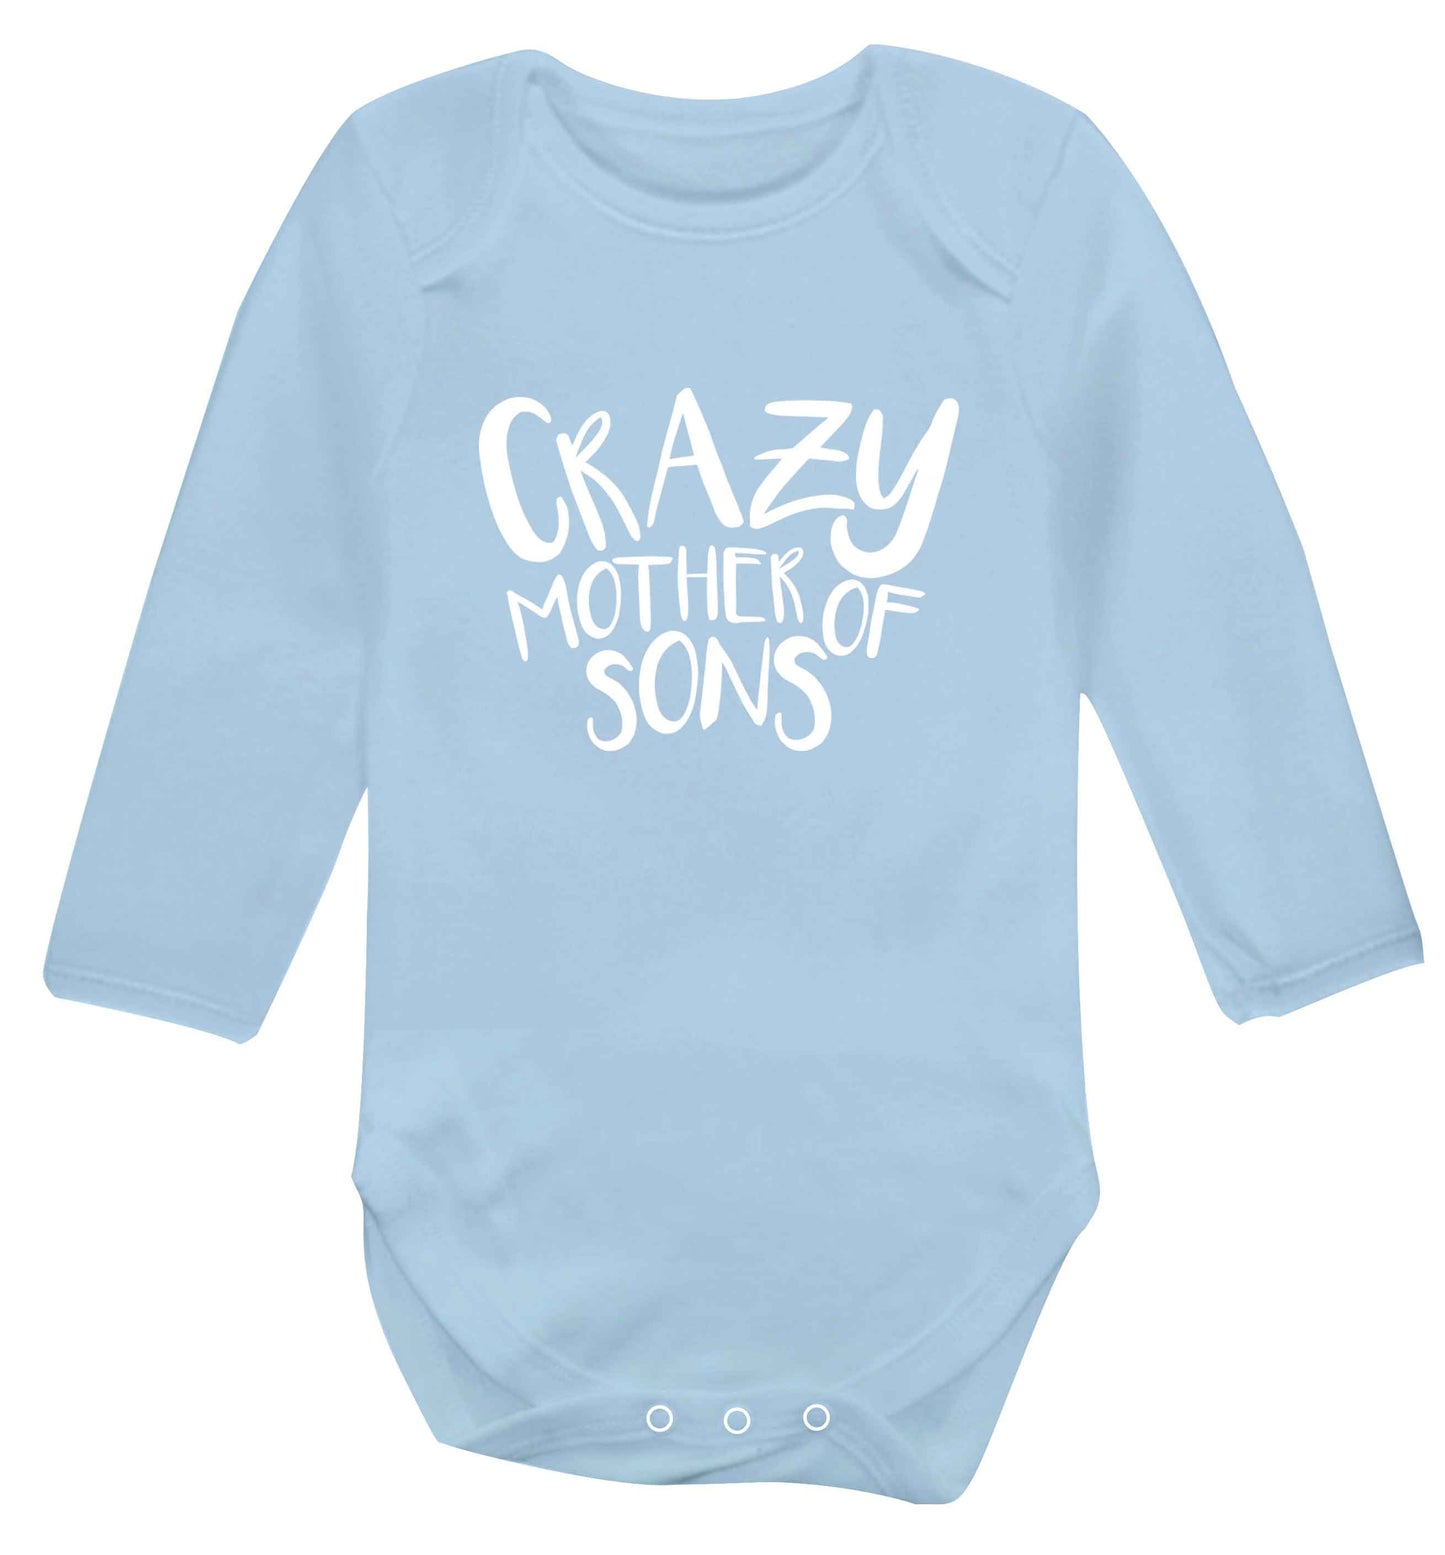 Crazy mother of sons baby vest long sleeved pale blue 6-12 months